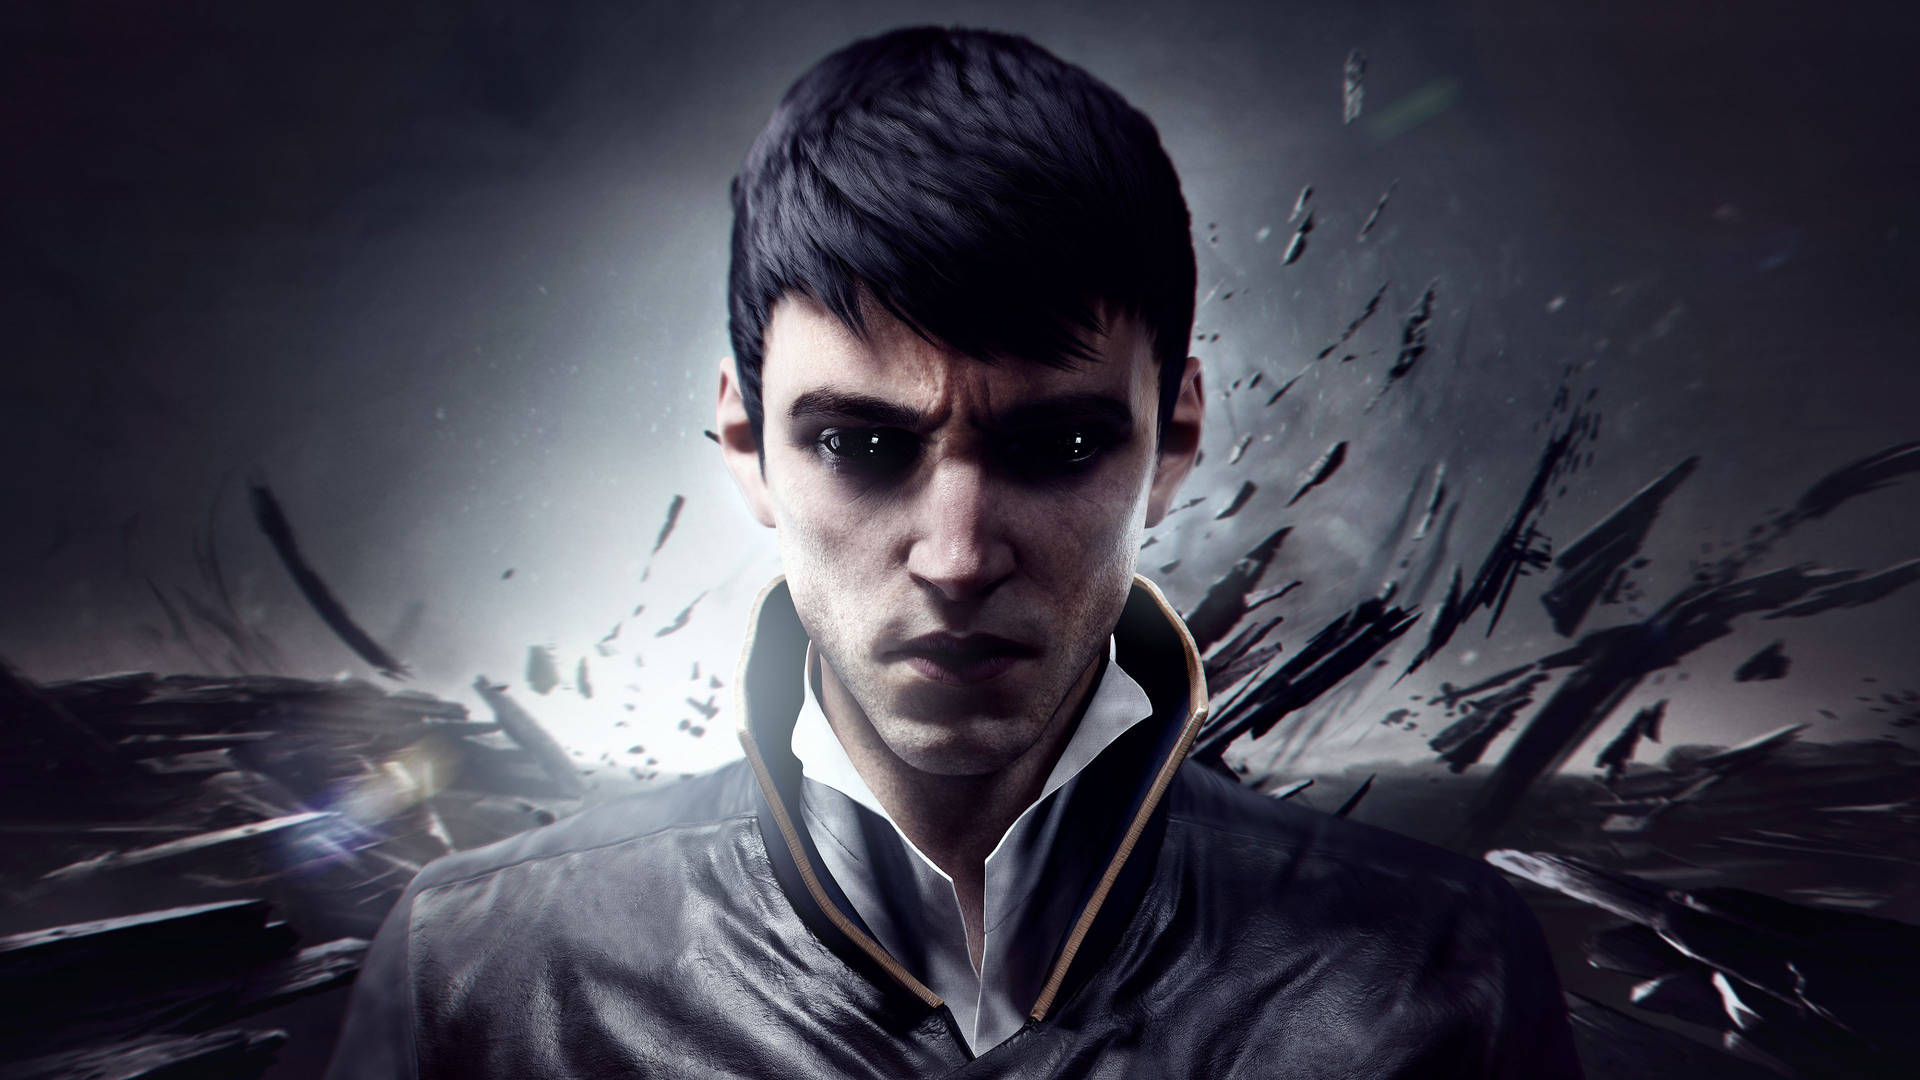 Top 999+ Dishonored 2 Wallpaper Full HD, 4K✅Free to Use